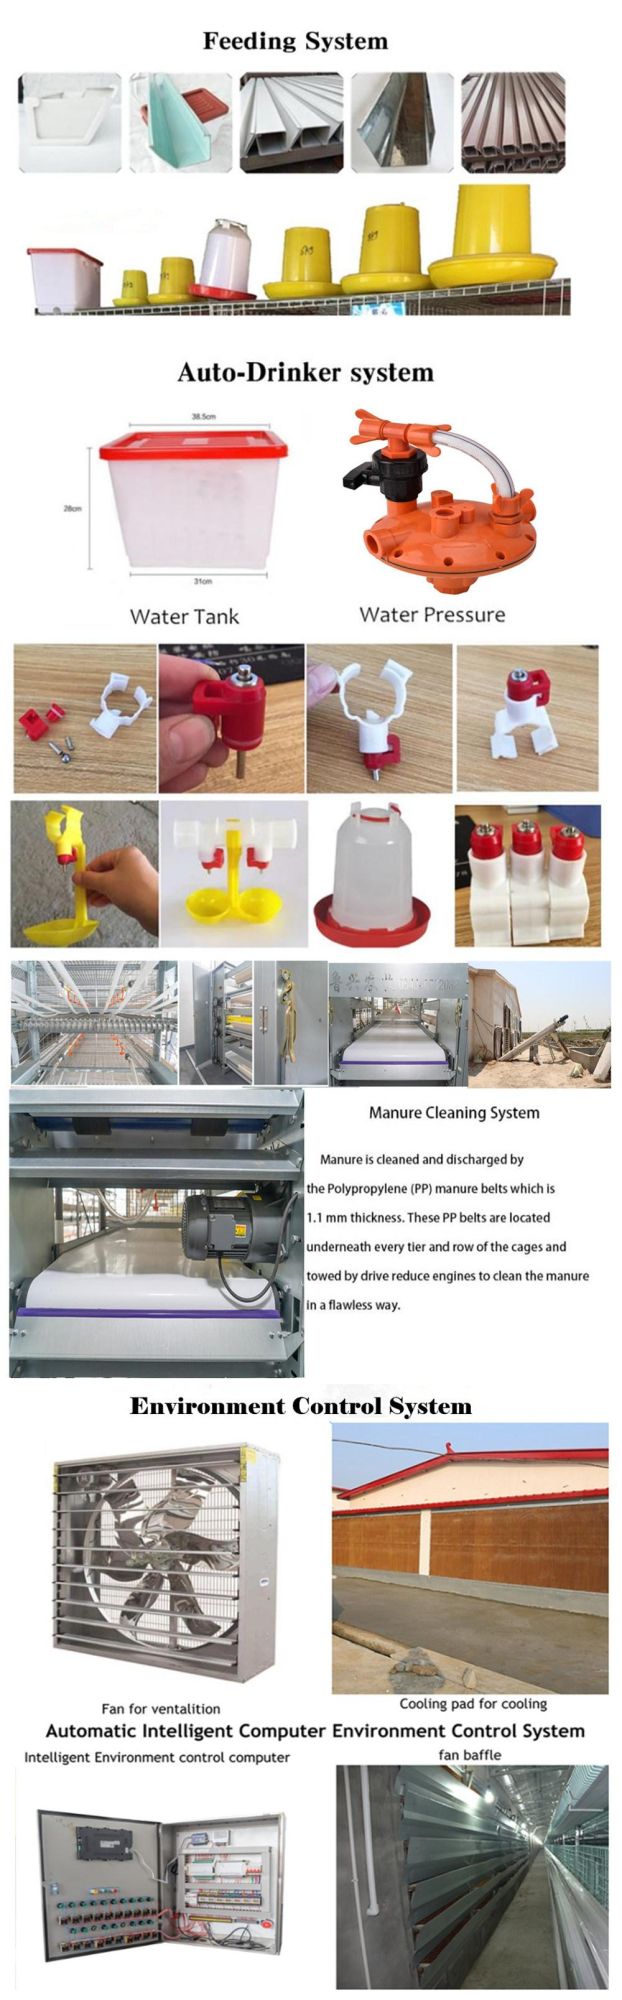 H Type Battery Cage for Poultry Layers / Automatic Chicken Laying Egg Cages / Brooder Chicken Coop